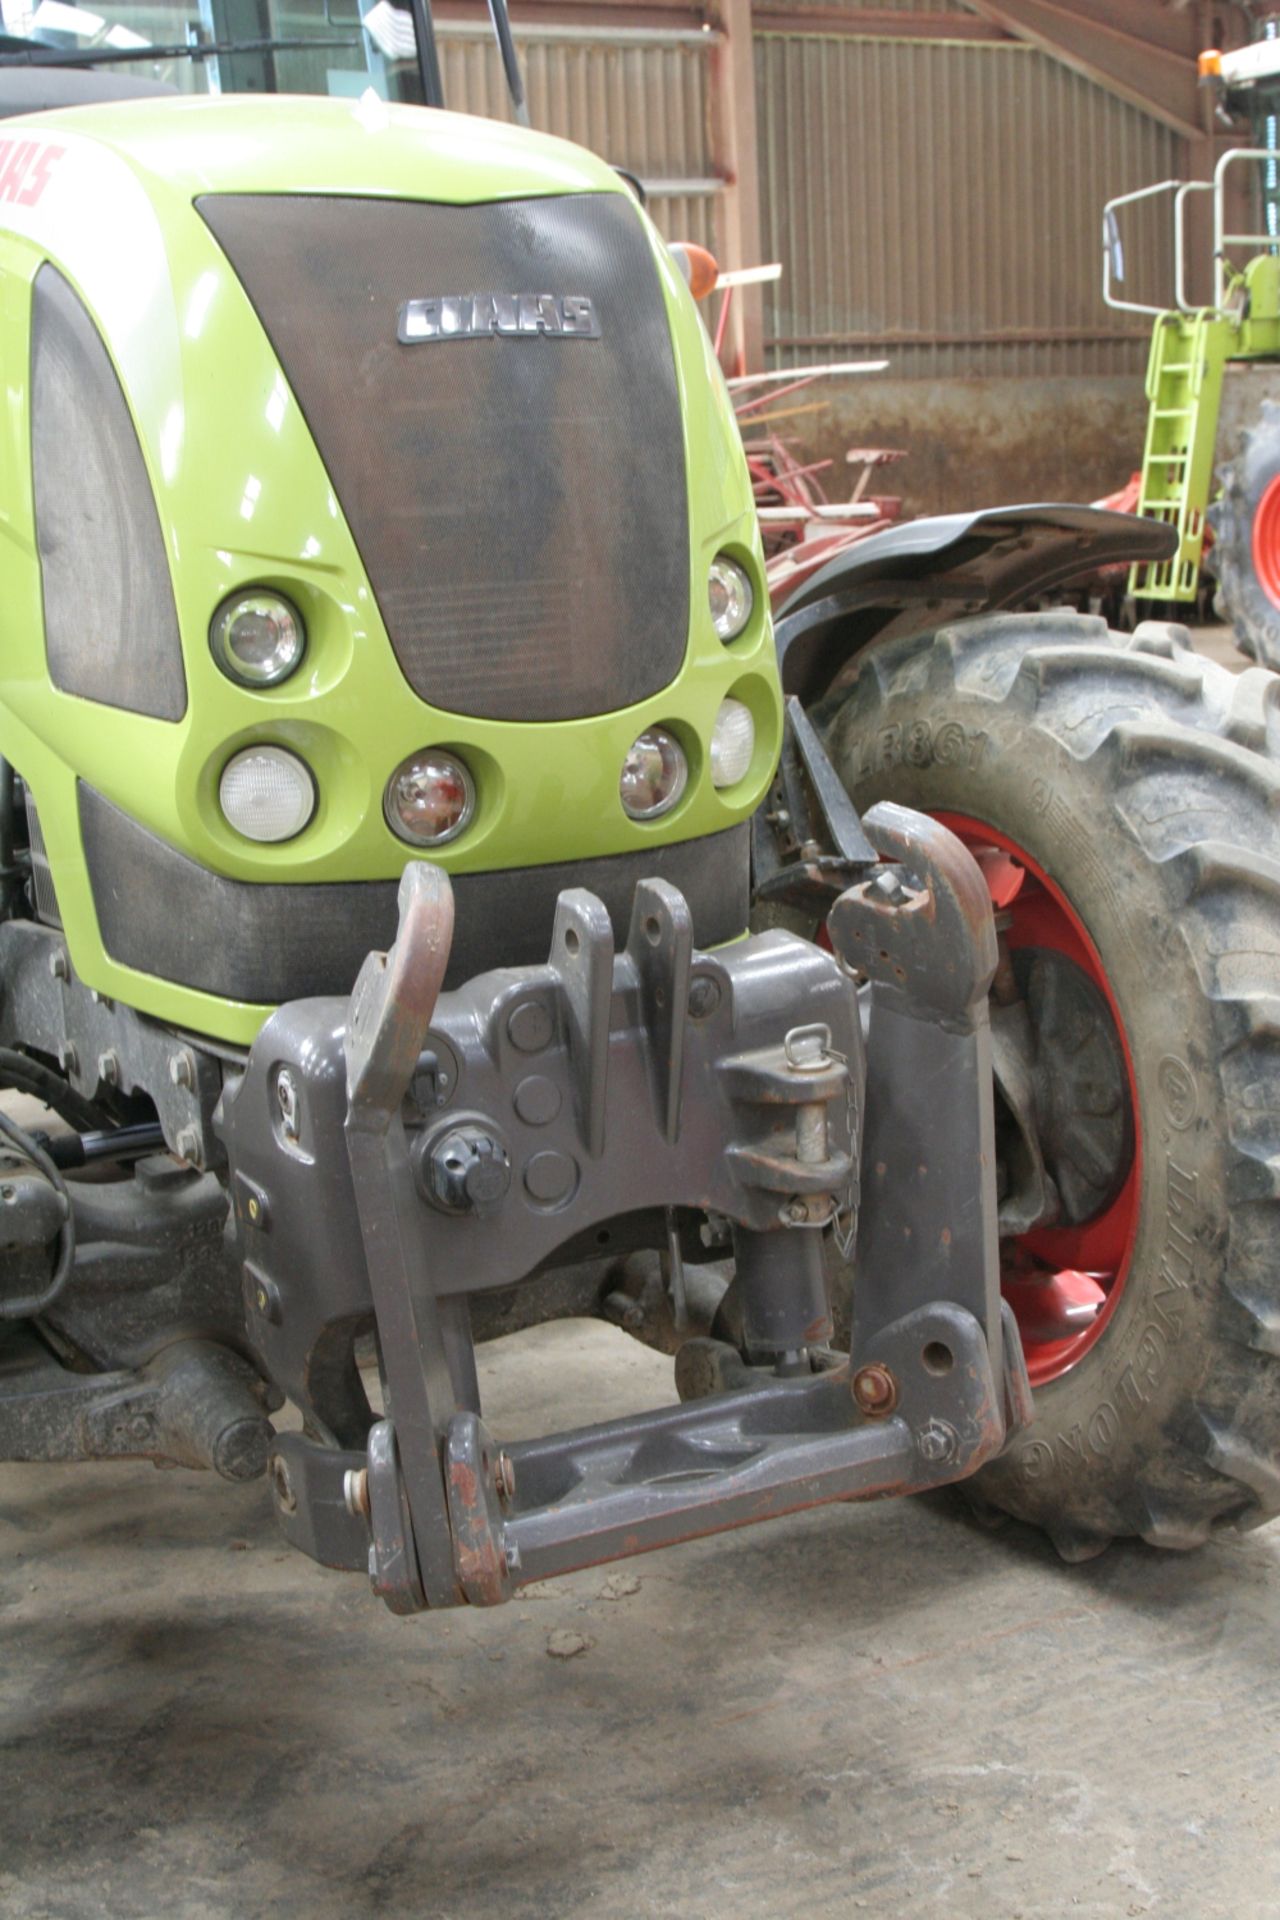 Claas Arion 630 Tractor 50k AY10 BXW 6,673 hours - Image 7 of 10